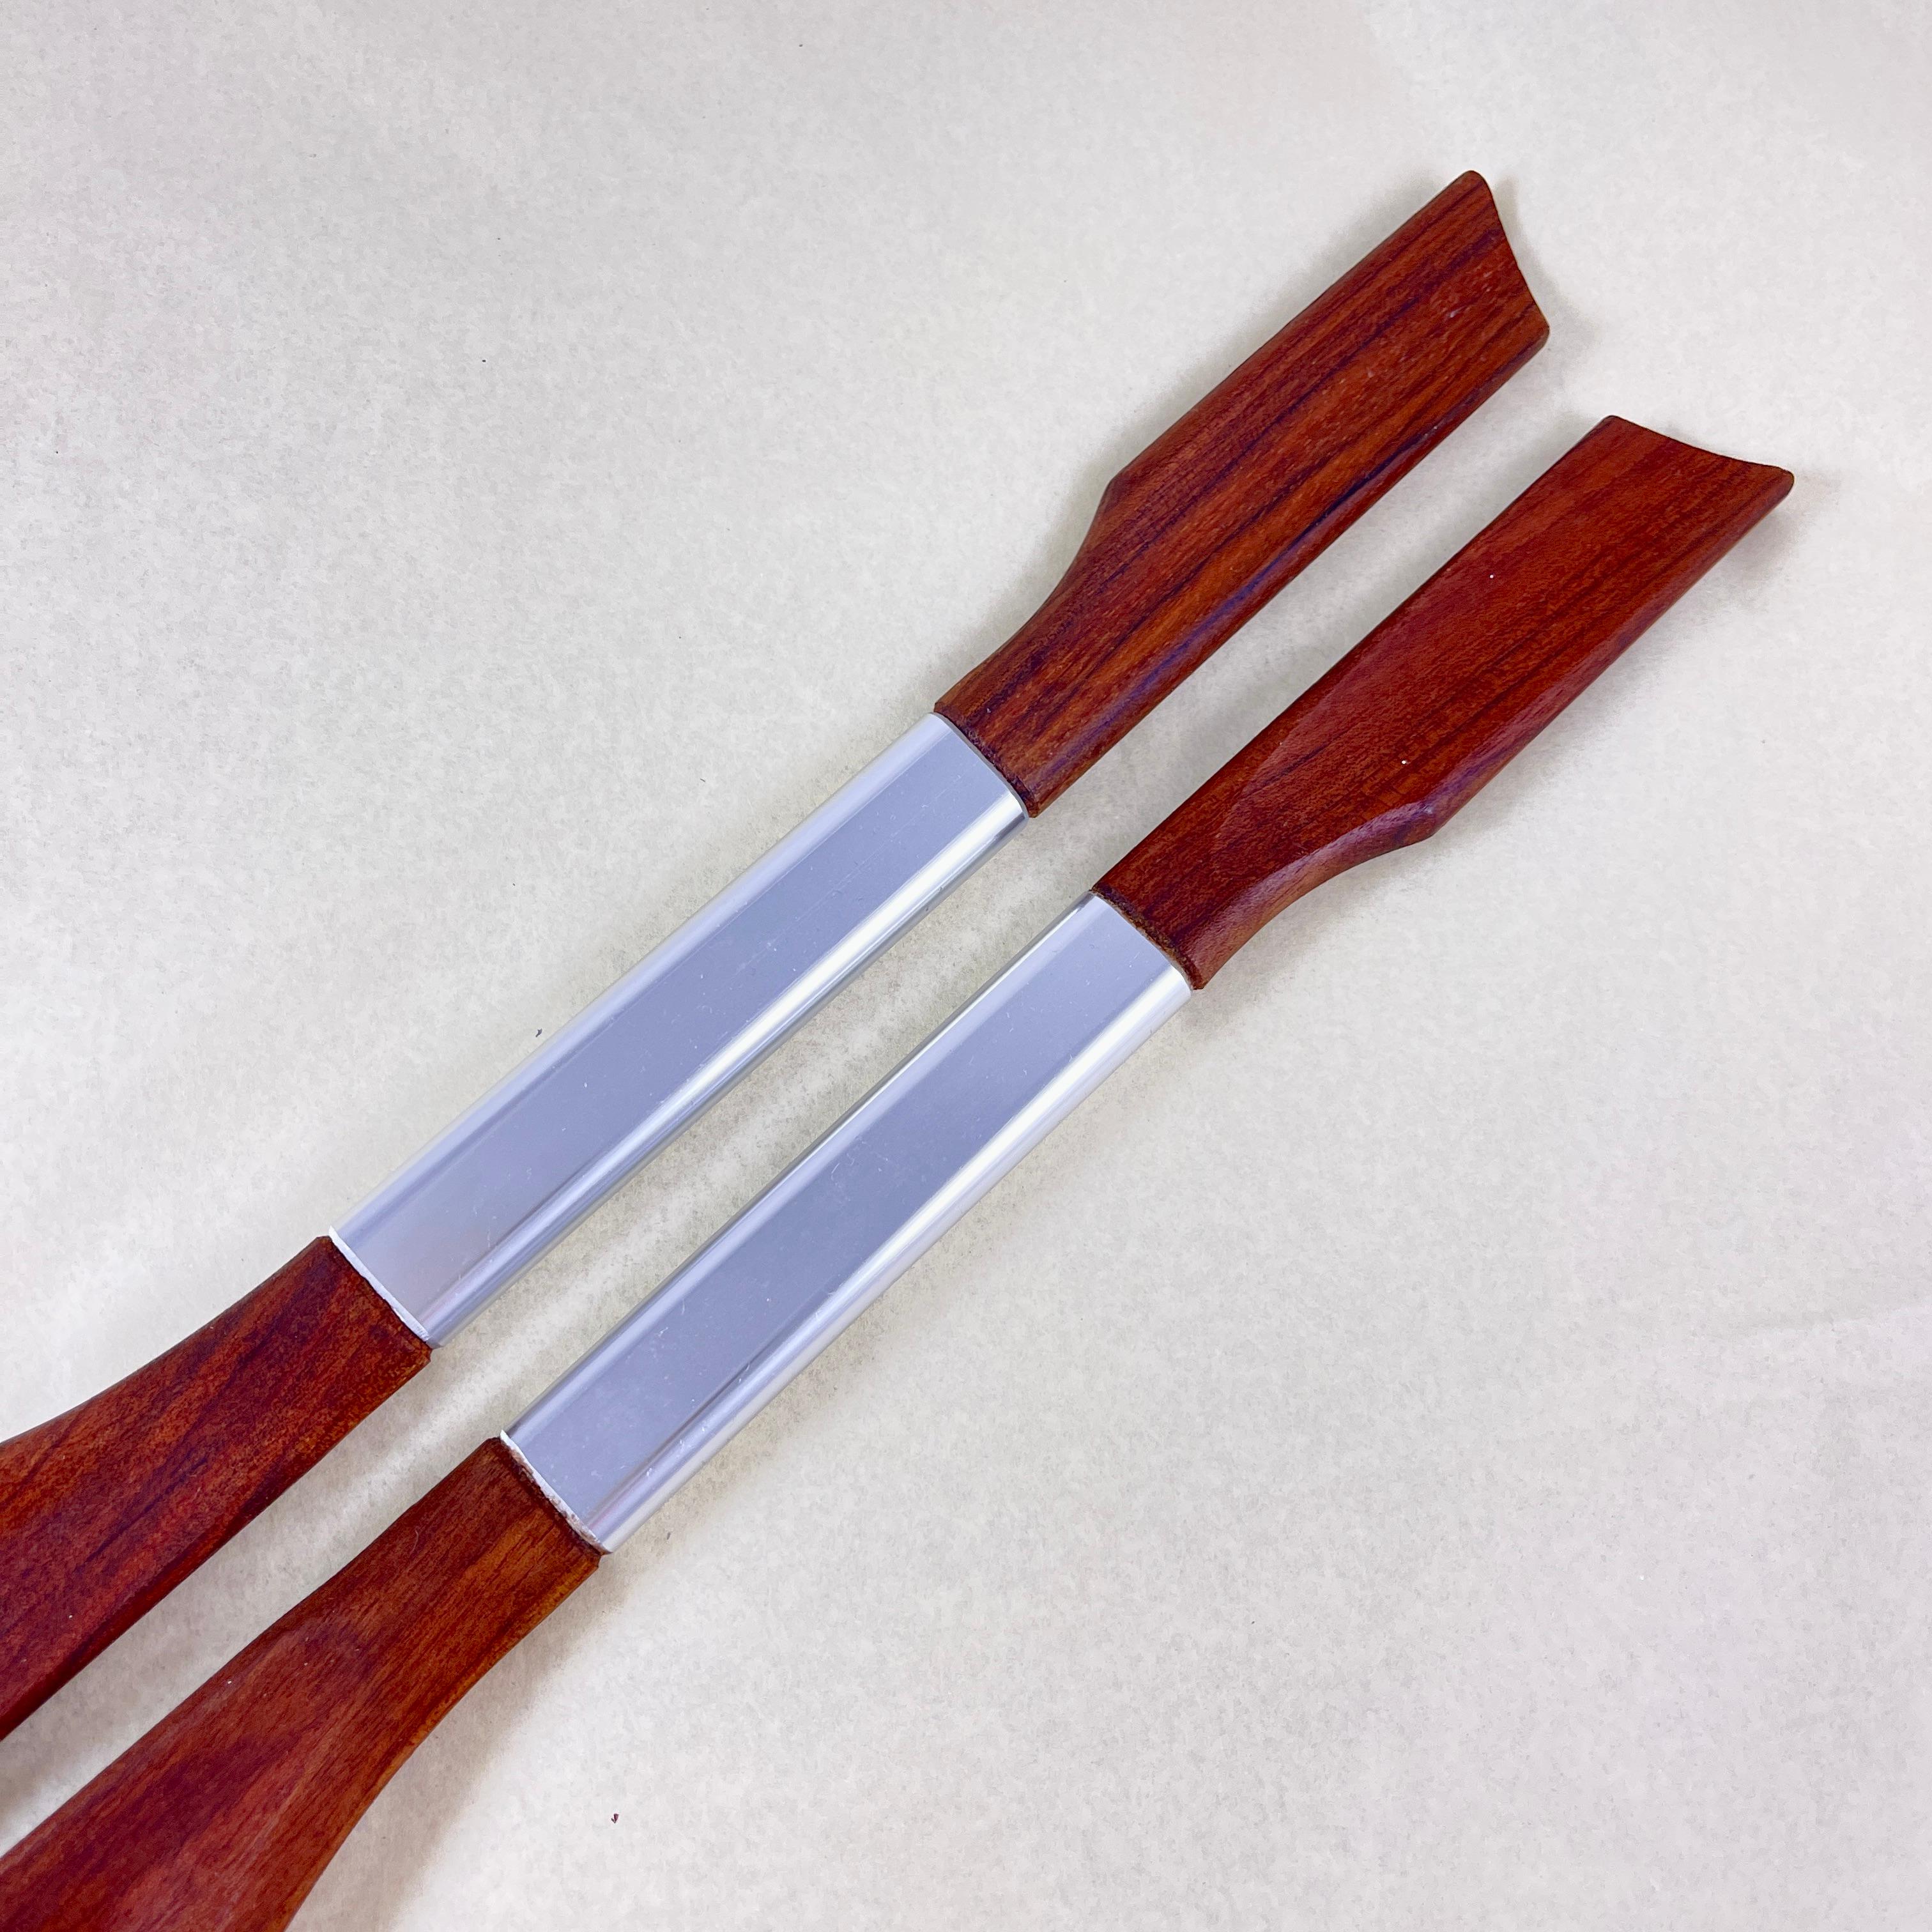 20th Century Danish Modern Teak Wood & Stainless Steel Banded Salad Servers, a Pair For Sale